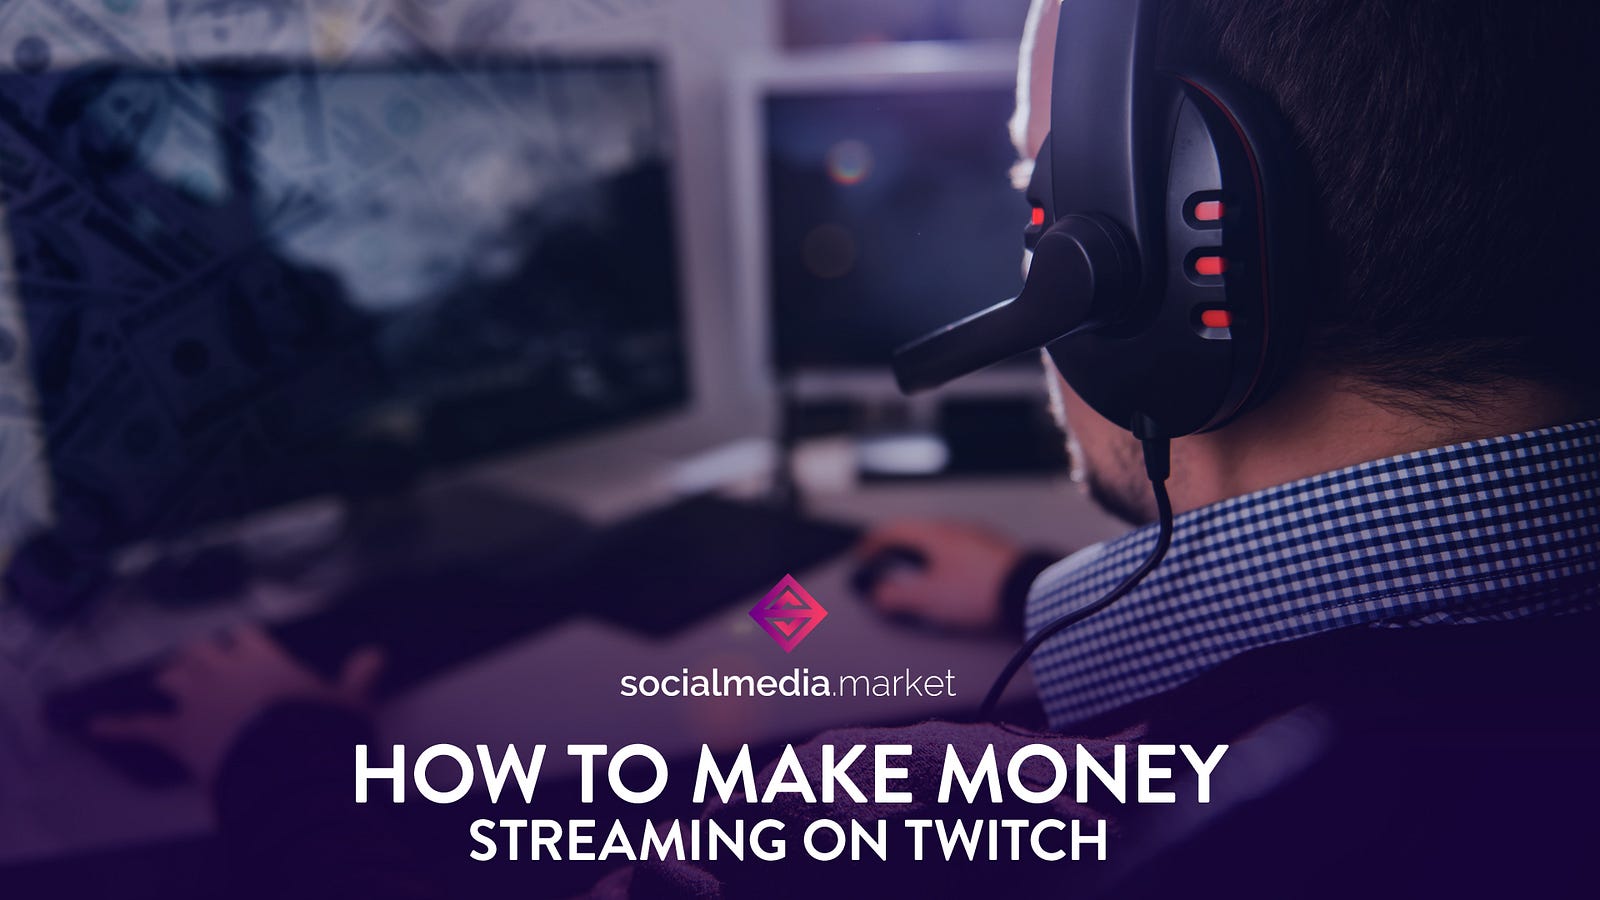 7 Ways to Make Money Streaming Video Games on Twitch